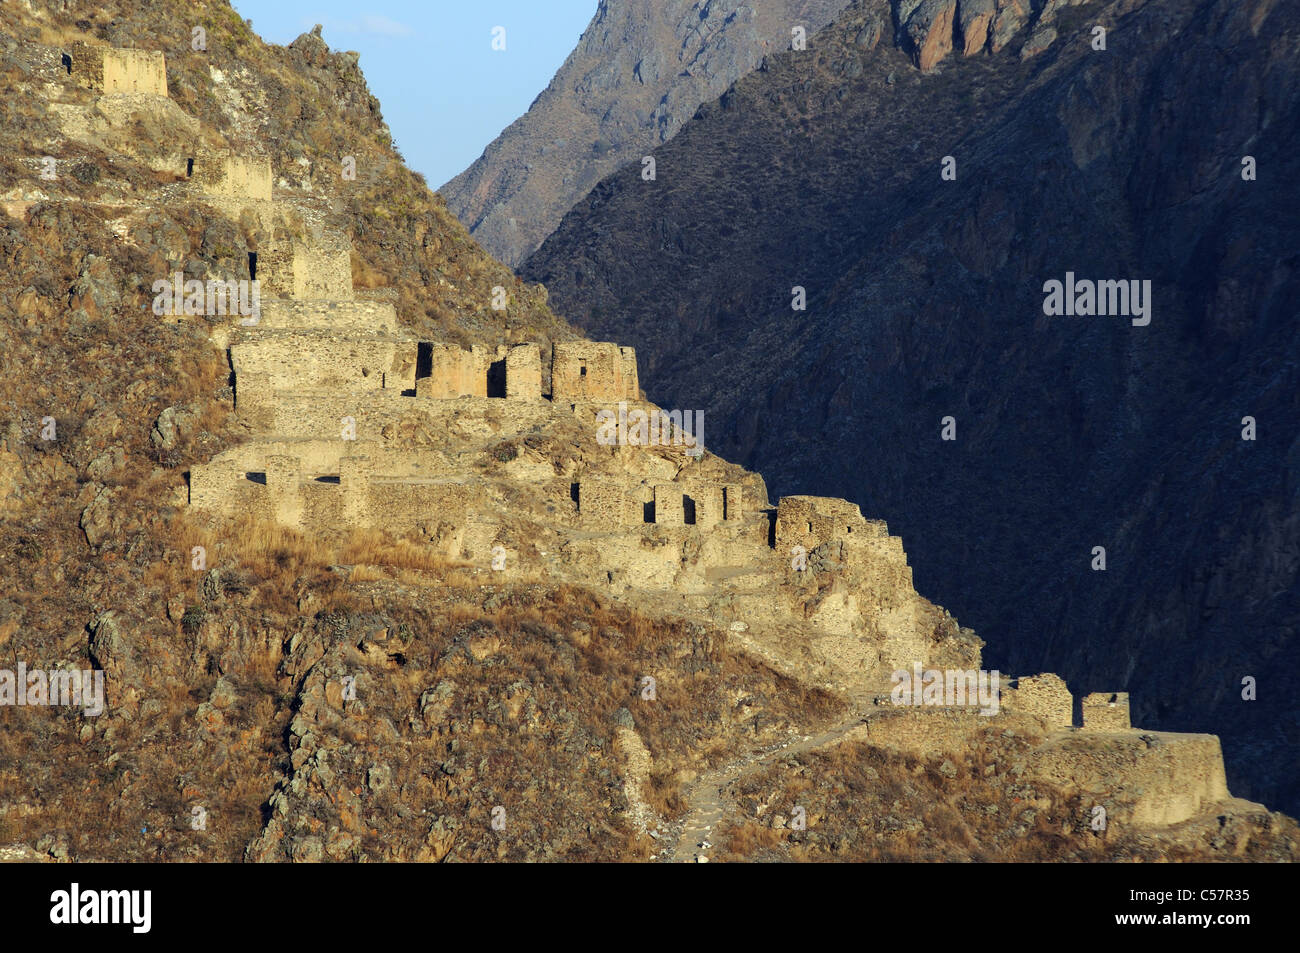 Inca ruins above the town of Ollantaytambo on the Inca Trail, Peru Stock Photo